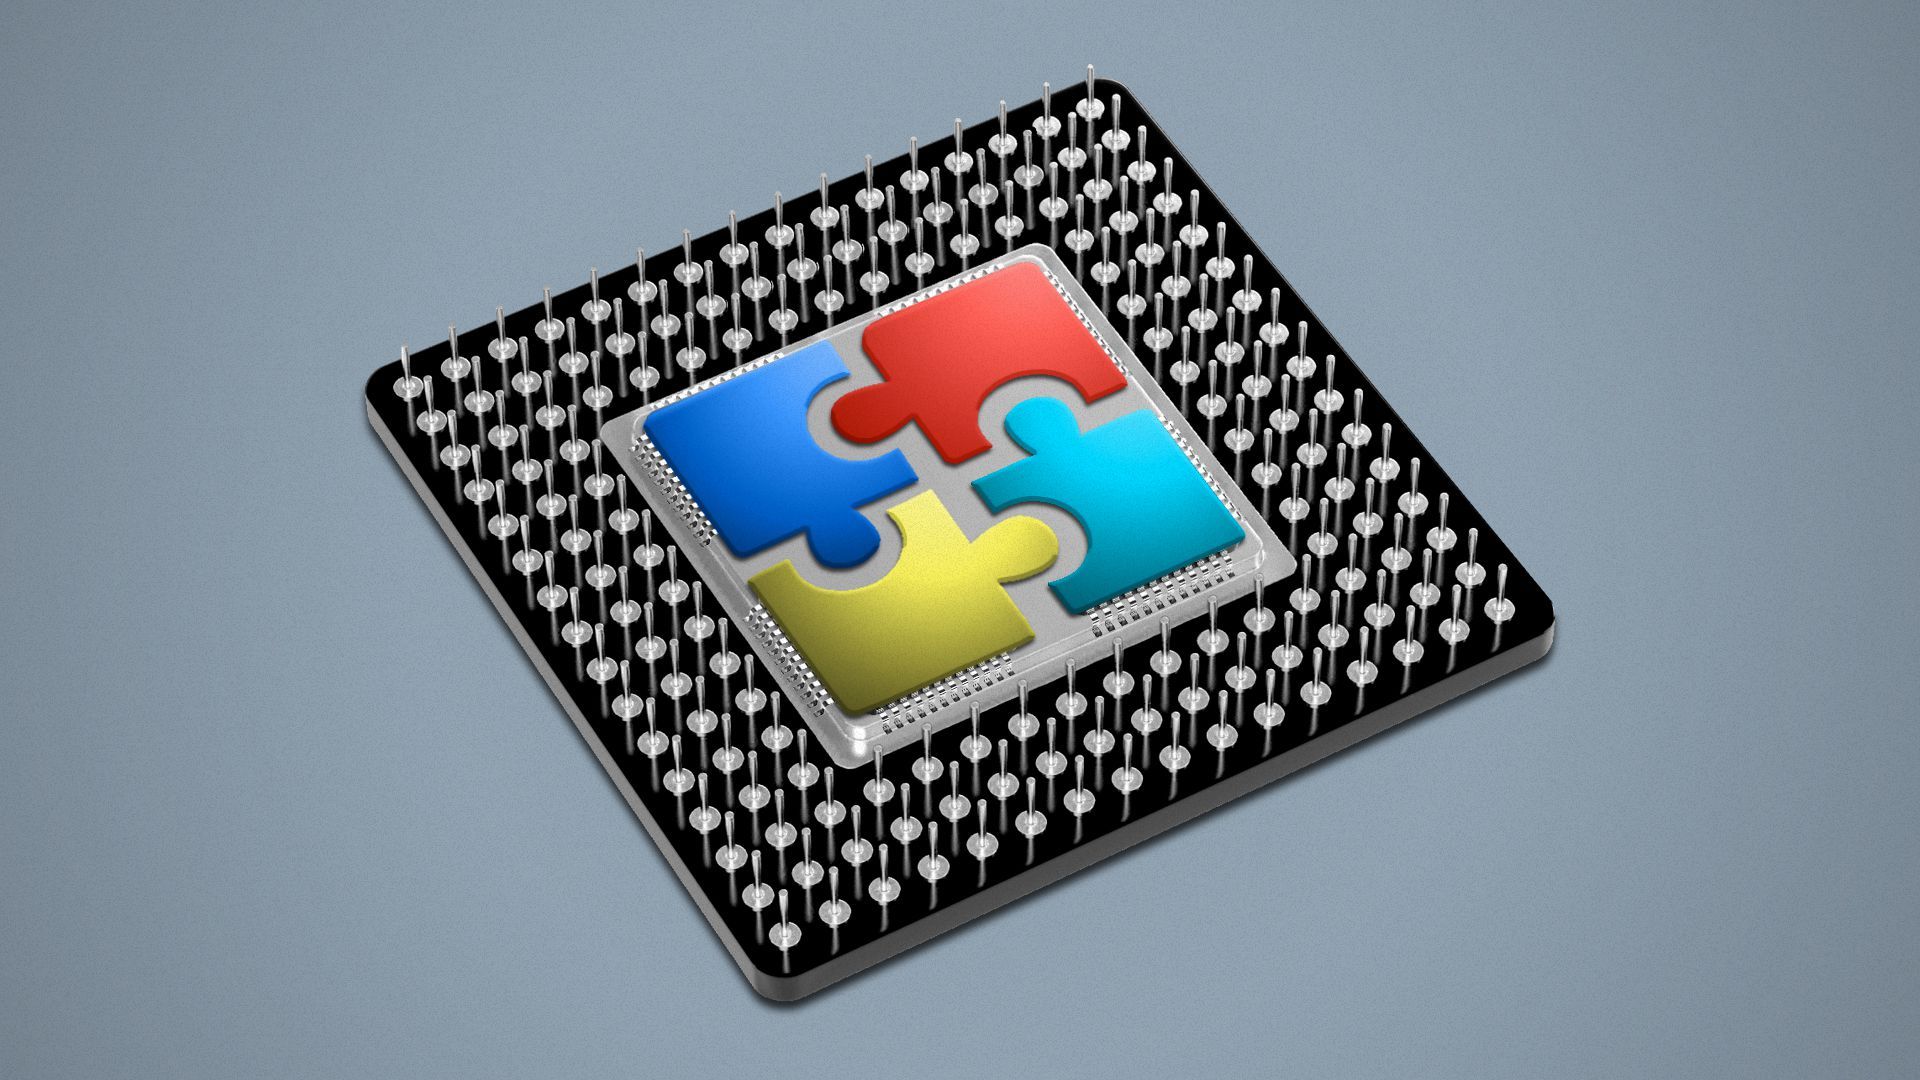 Illustration of microchips shaped like puzzle pieces on a CPU.